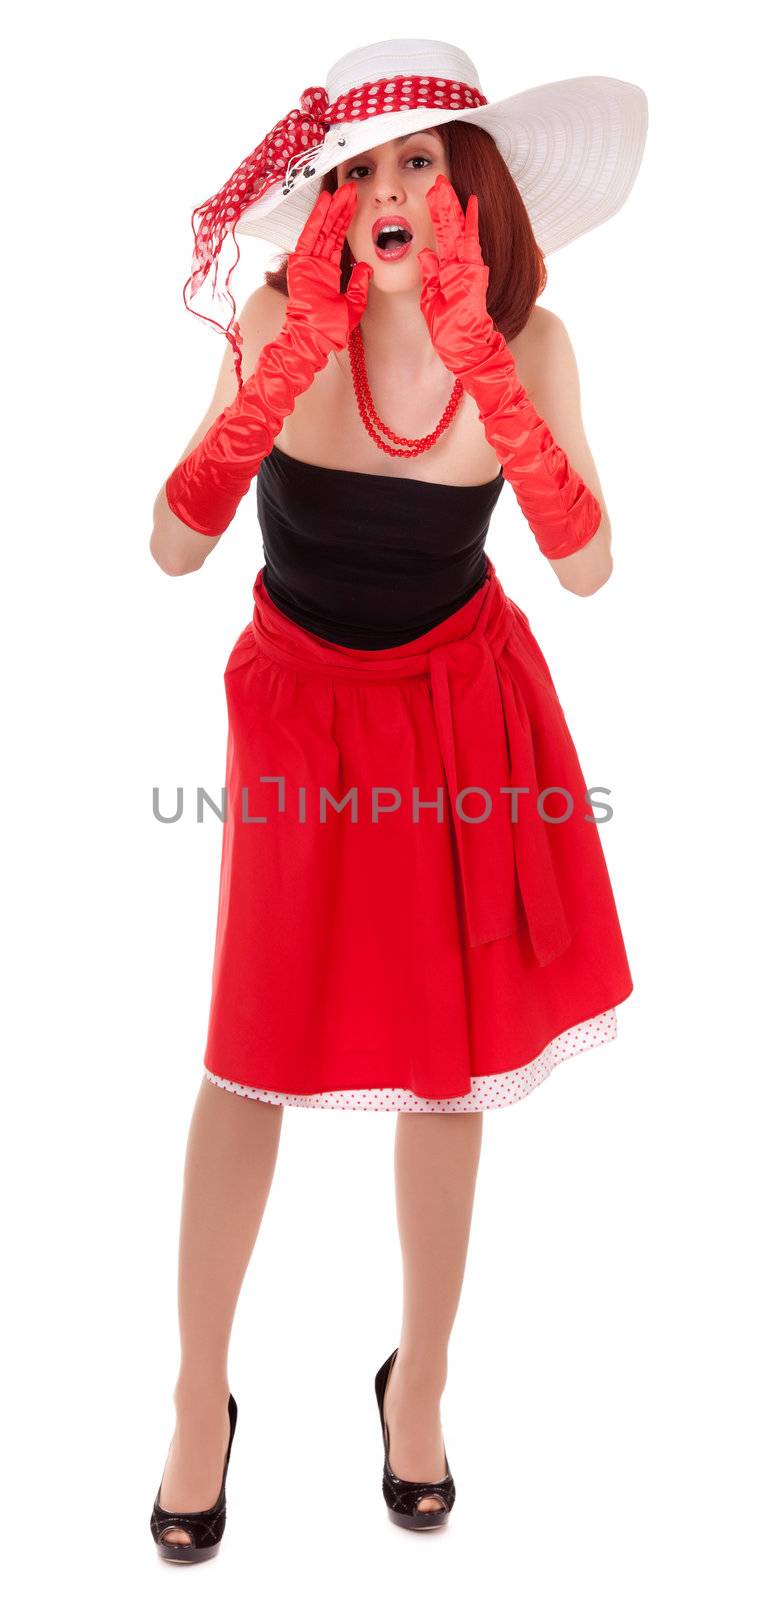 Shouting fashion girl in retro style with bright make-up and big hat on white background